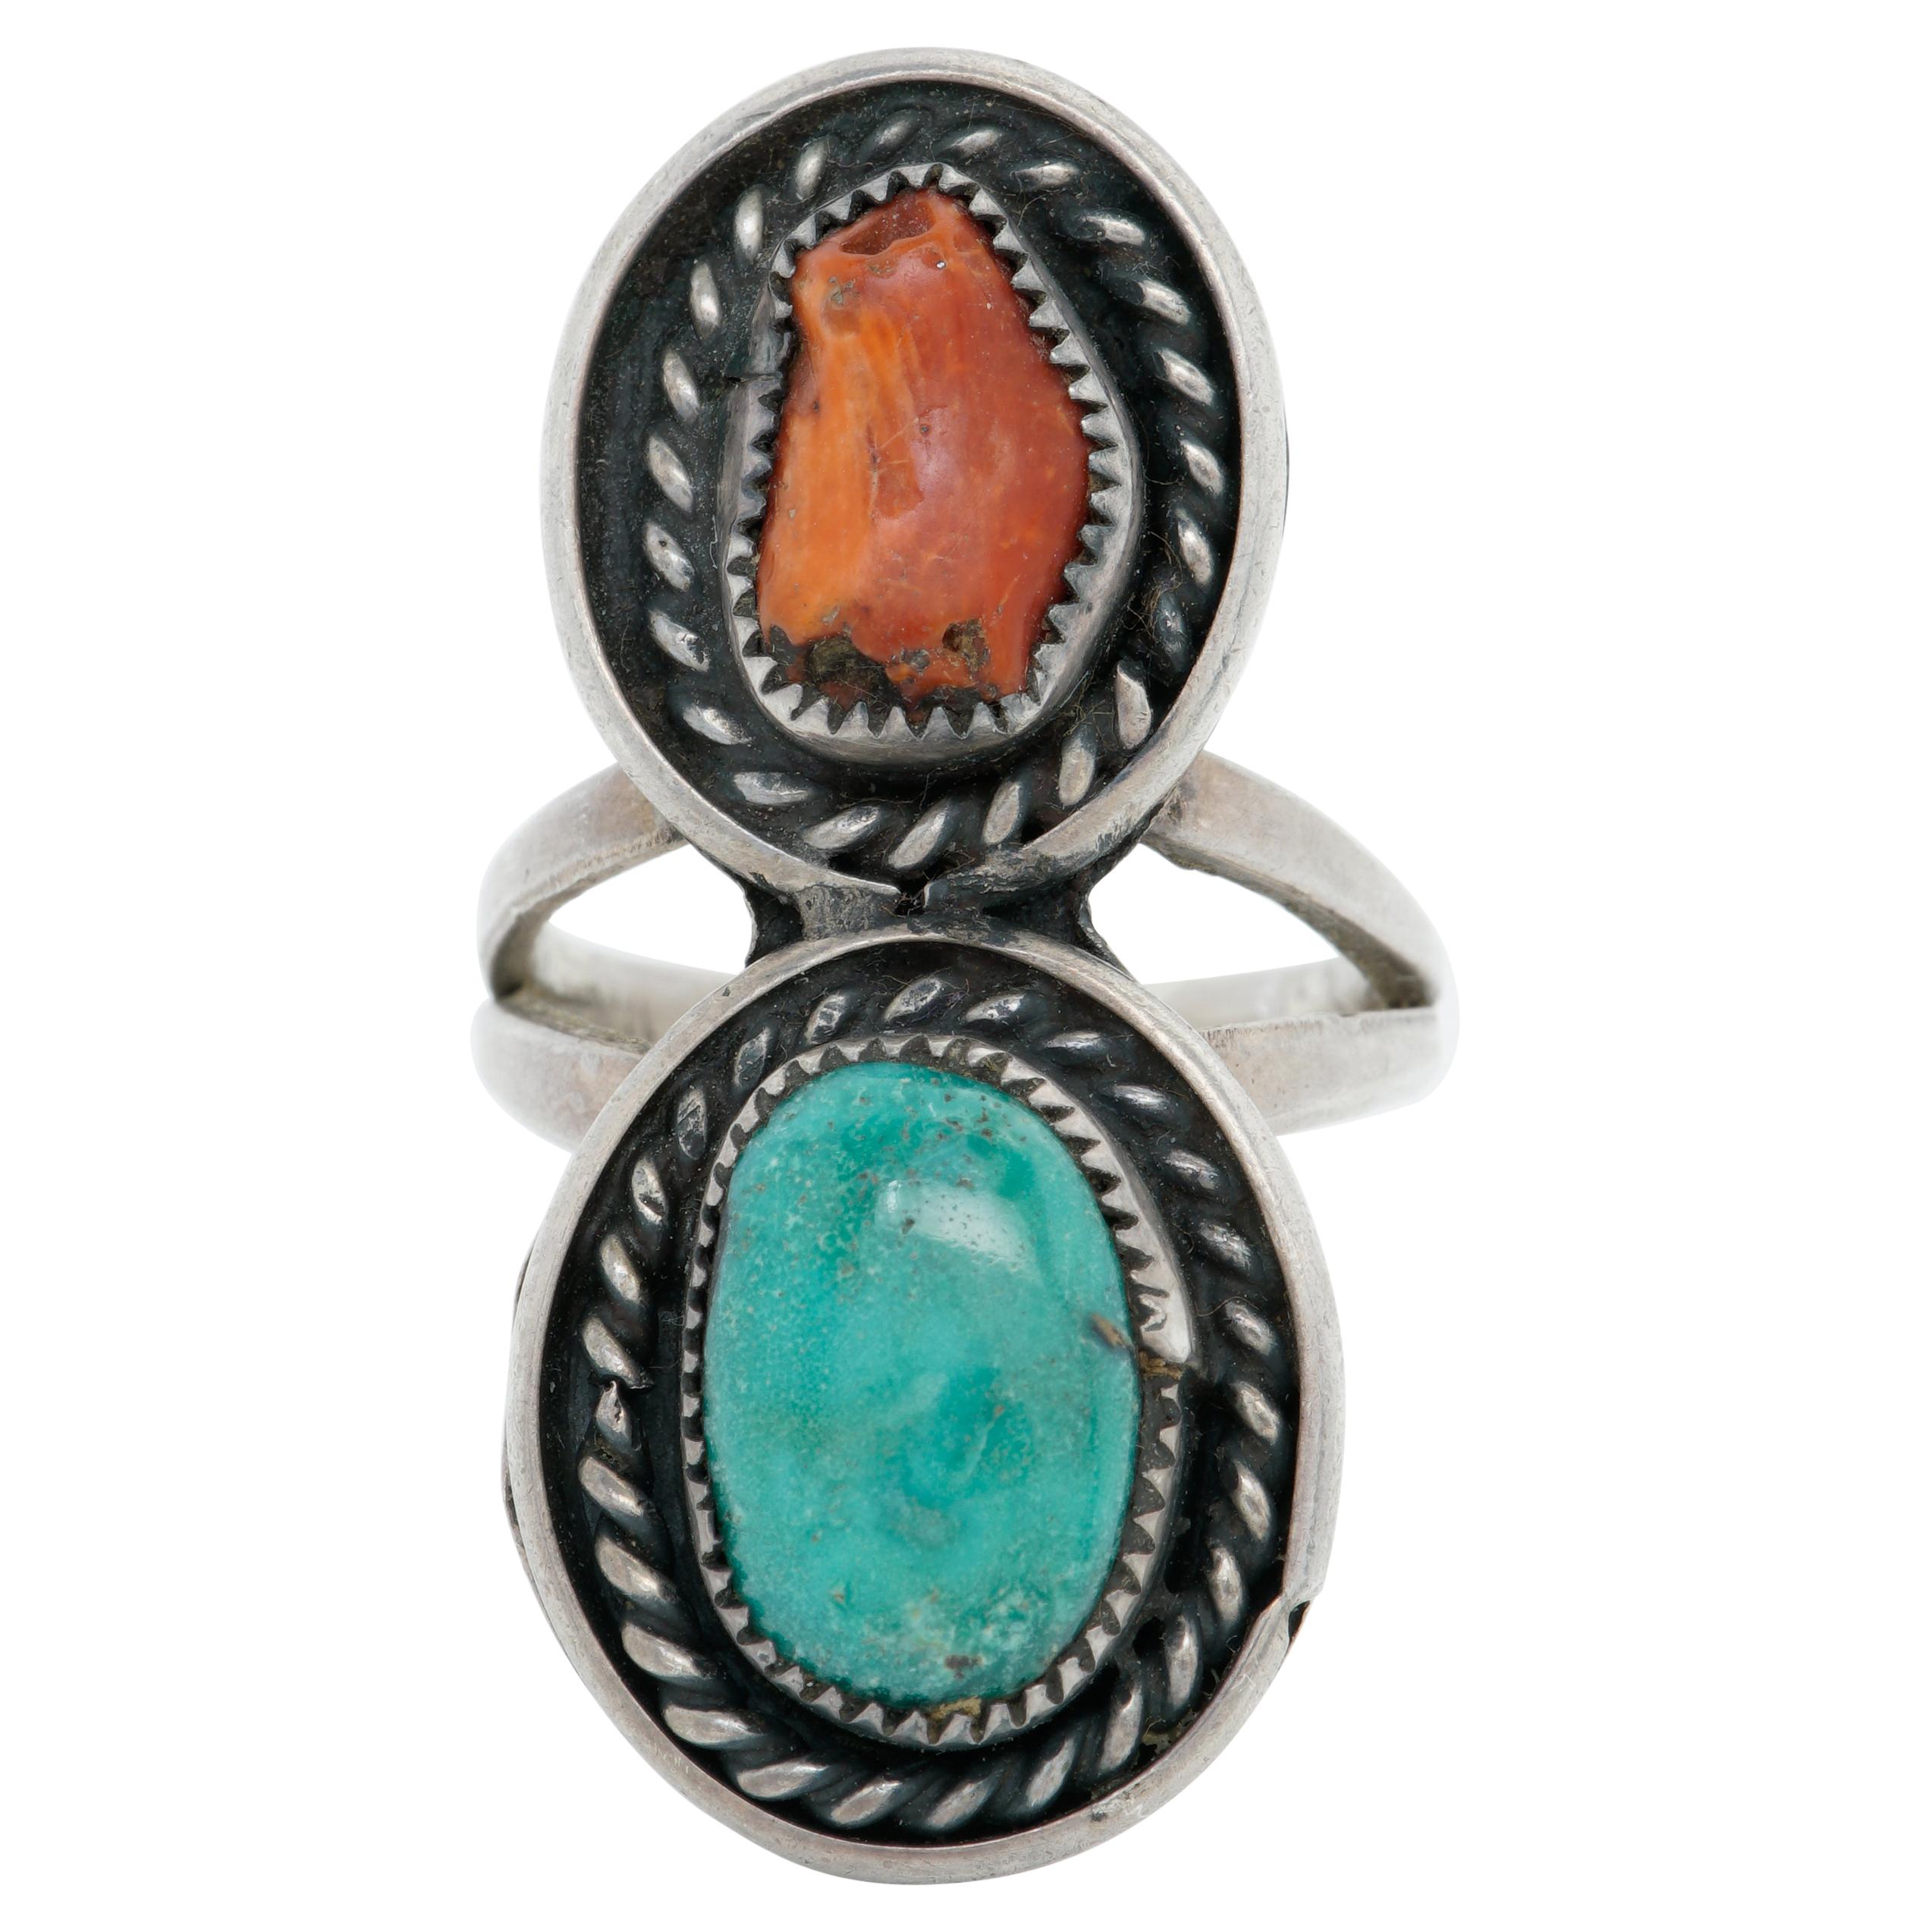 Signed Handmade Vintage Native American Sterling Silver & Turquoise Inlay Turquoise Ring